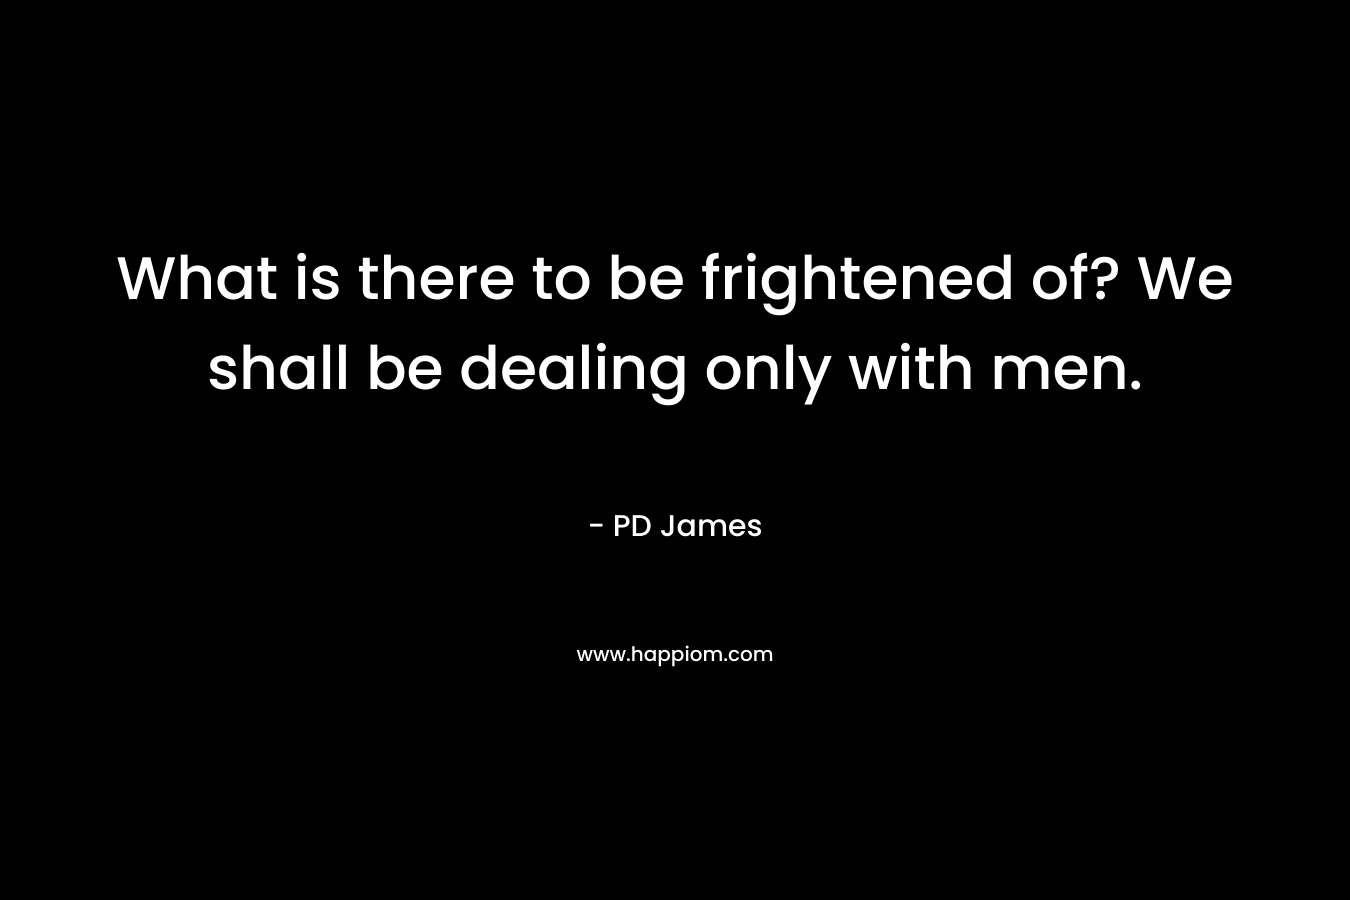 What is there to be frightened of? We shall be dealing only with men.